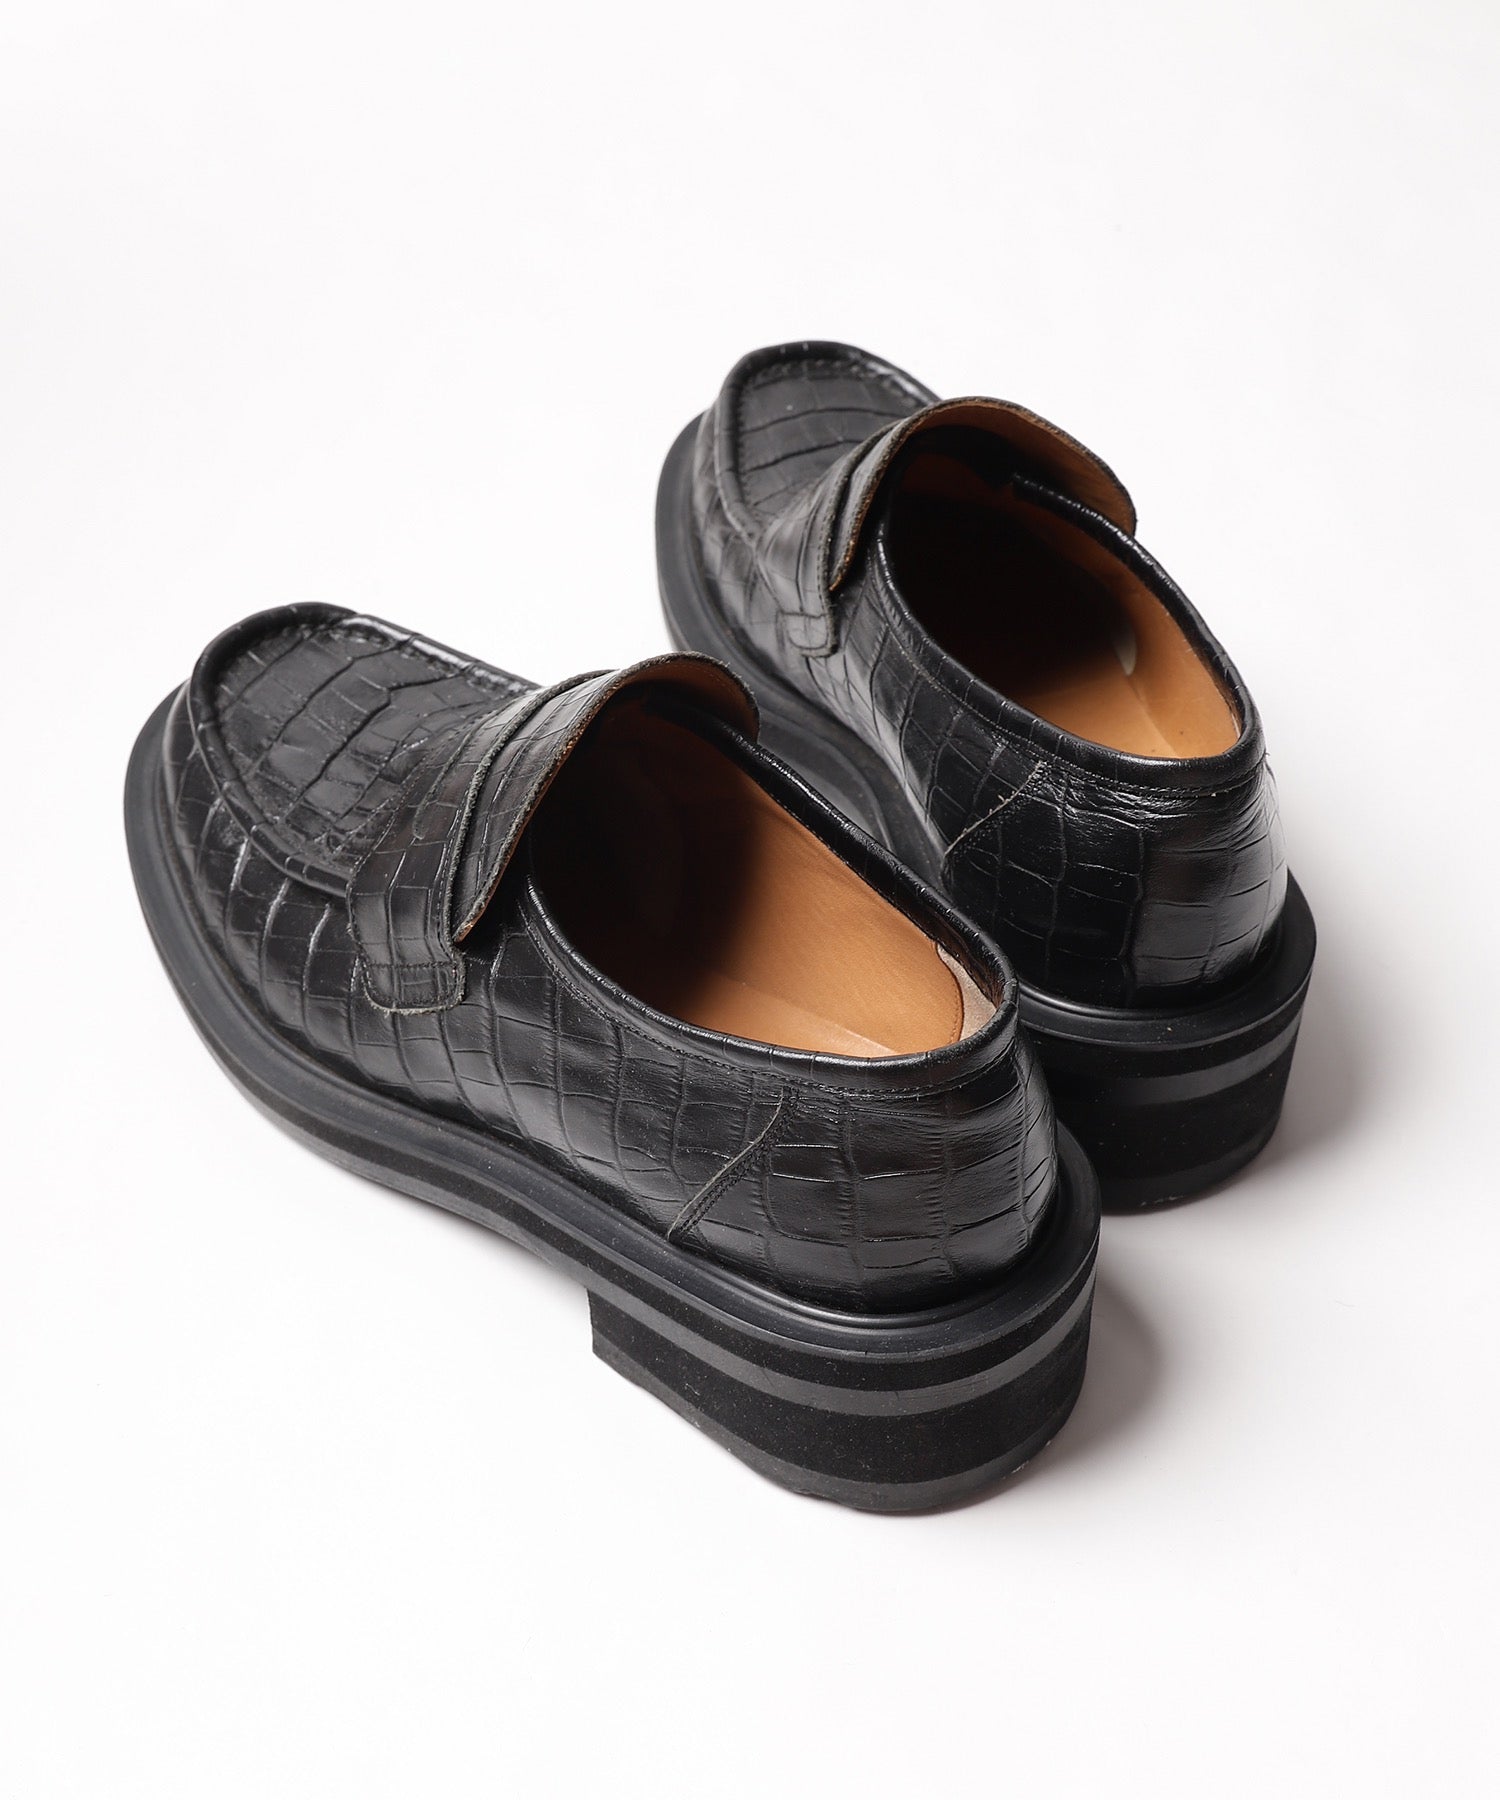 LEATHER LOAFERS 【納期8月下旬】 – ANLIO（アンリオ）